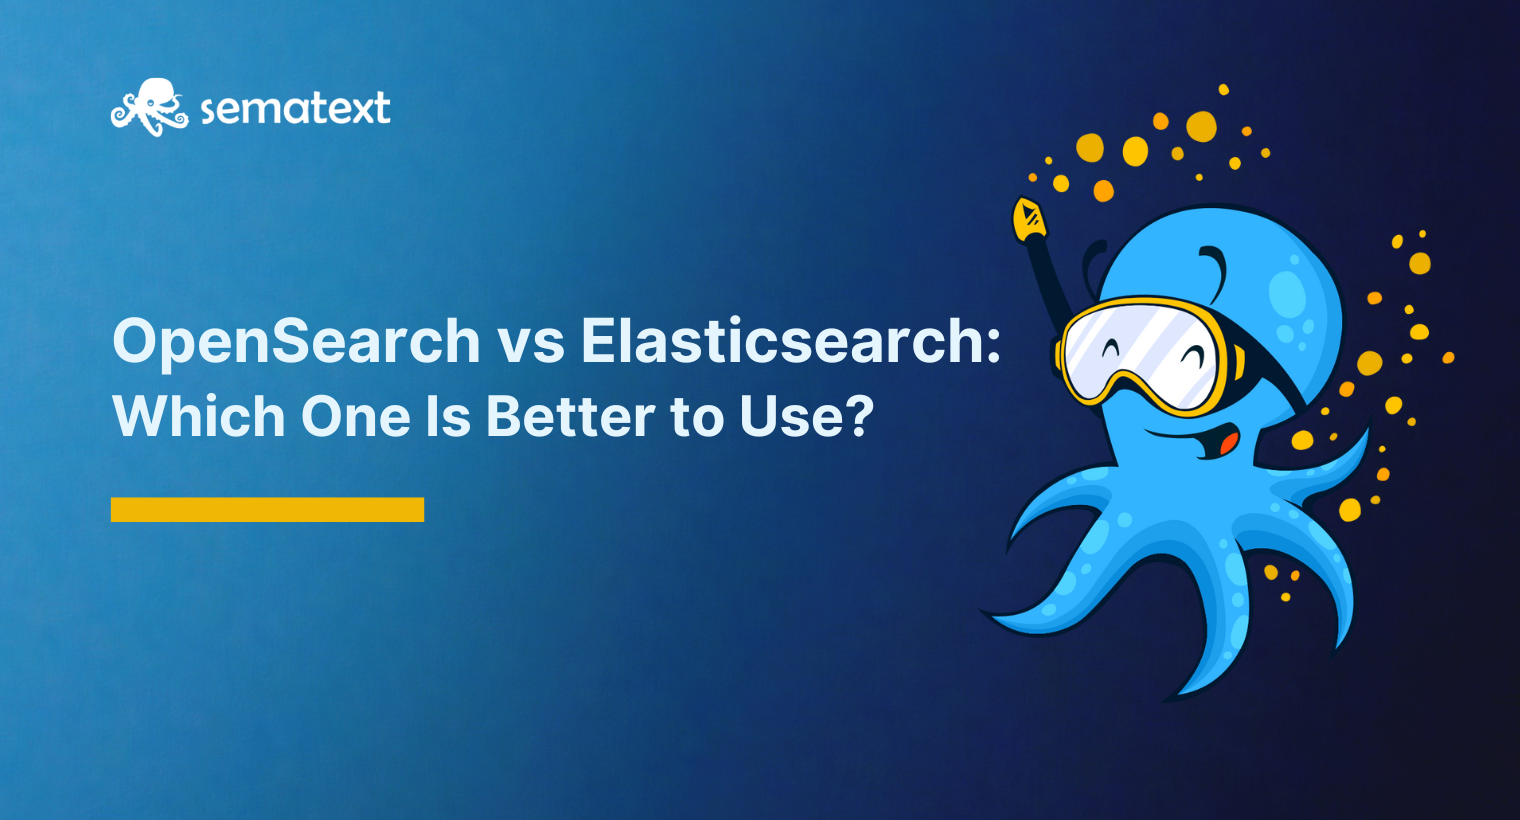 OpenSearch vs Elasticsearch: Which One Is Better to Use?